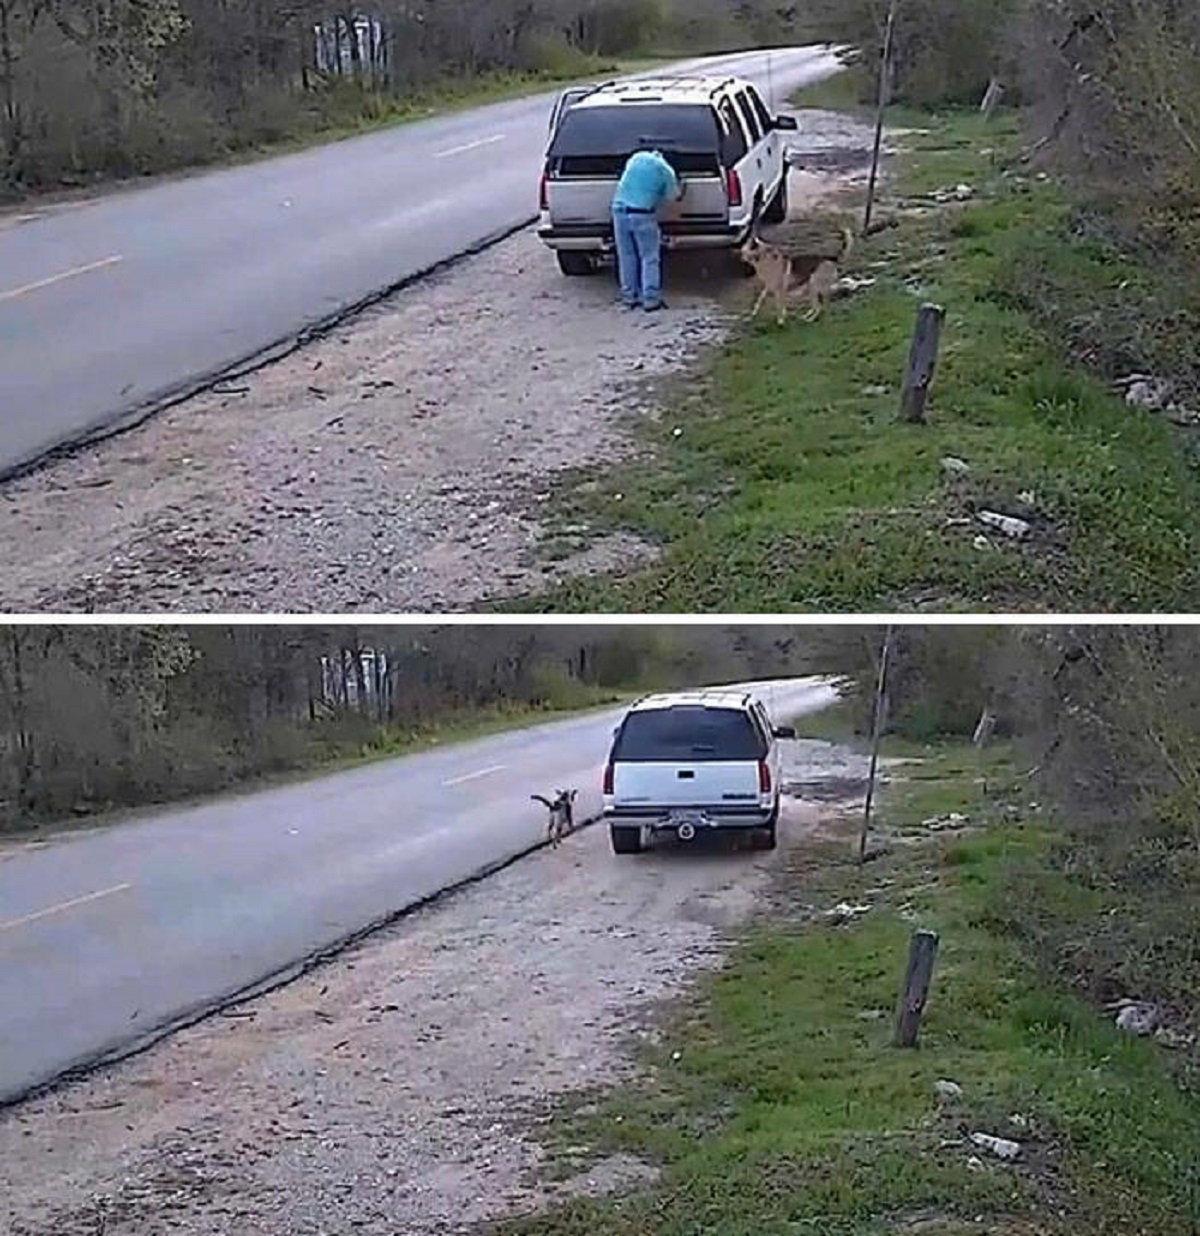 "Human Leaves His Dog On Side Of The Road"